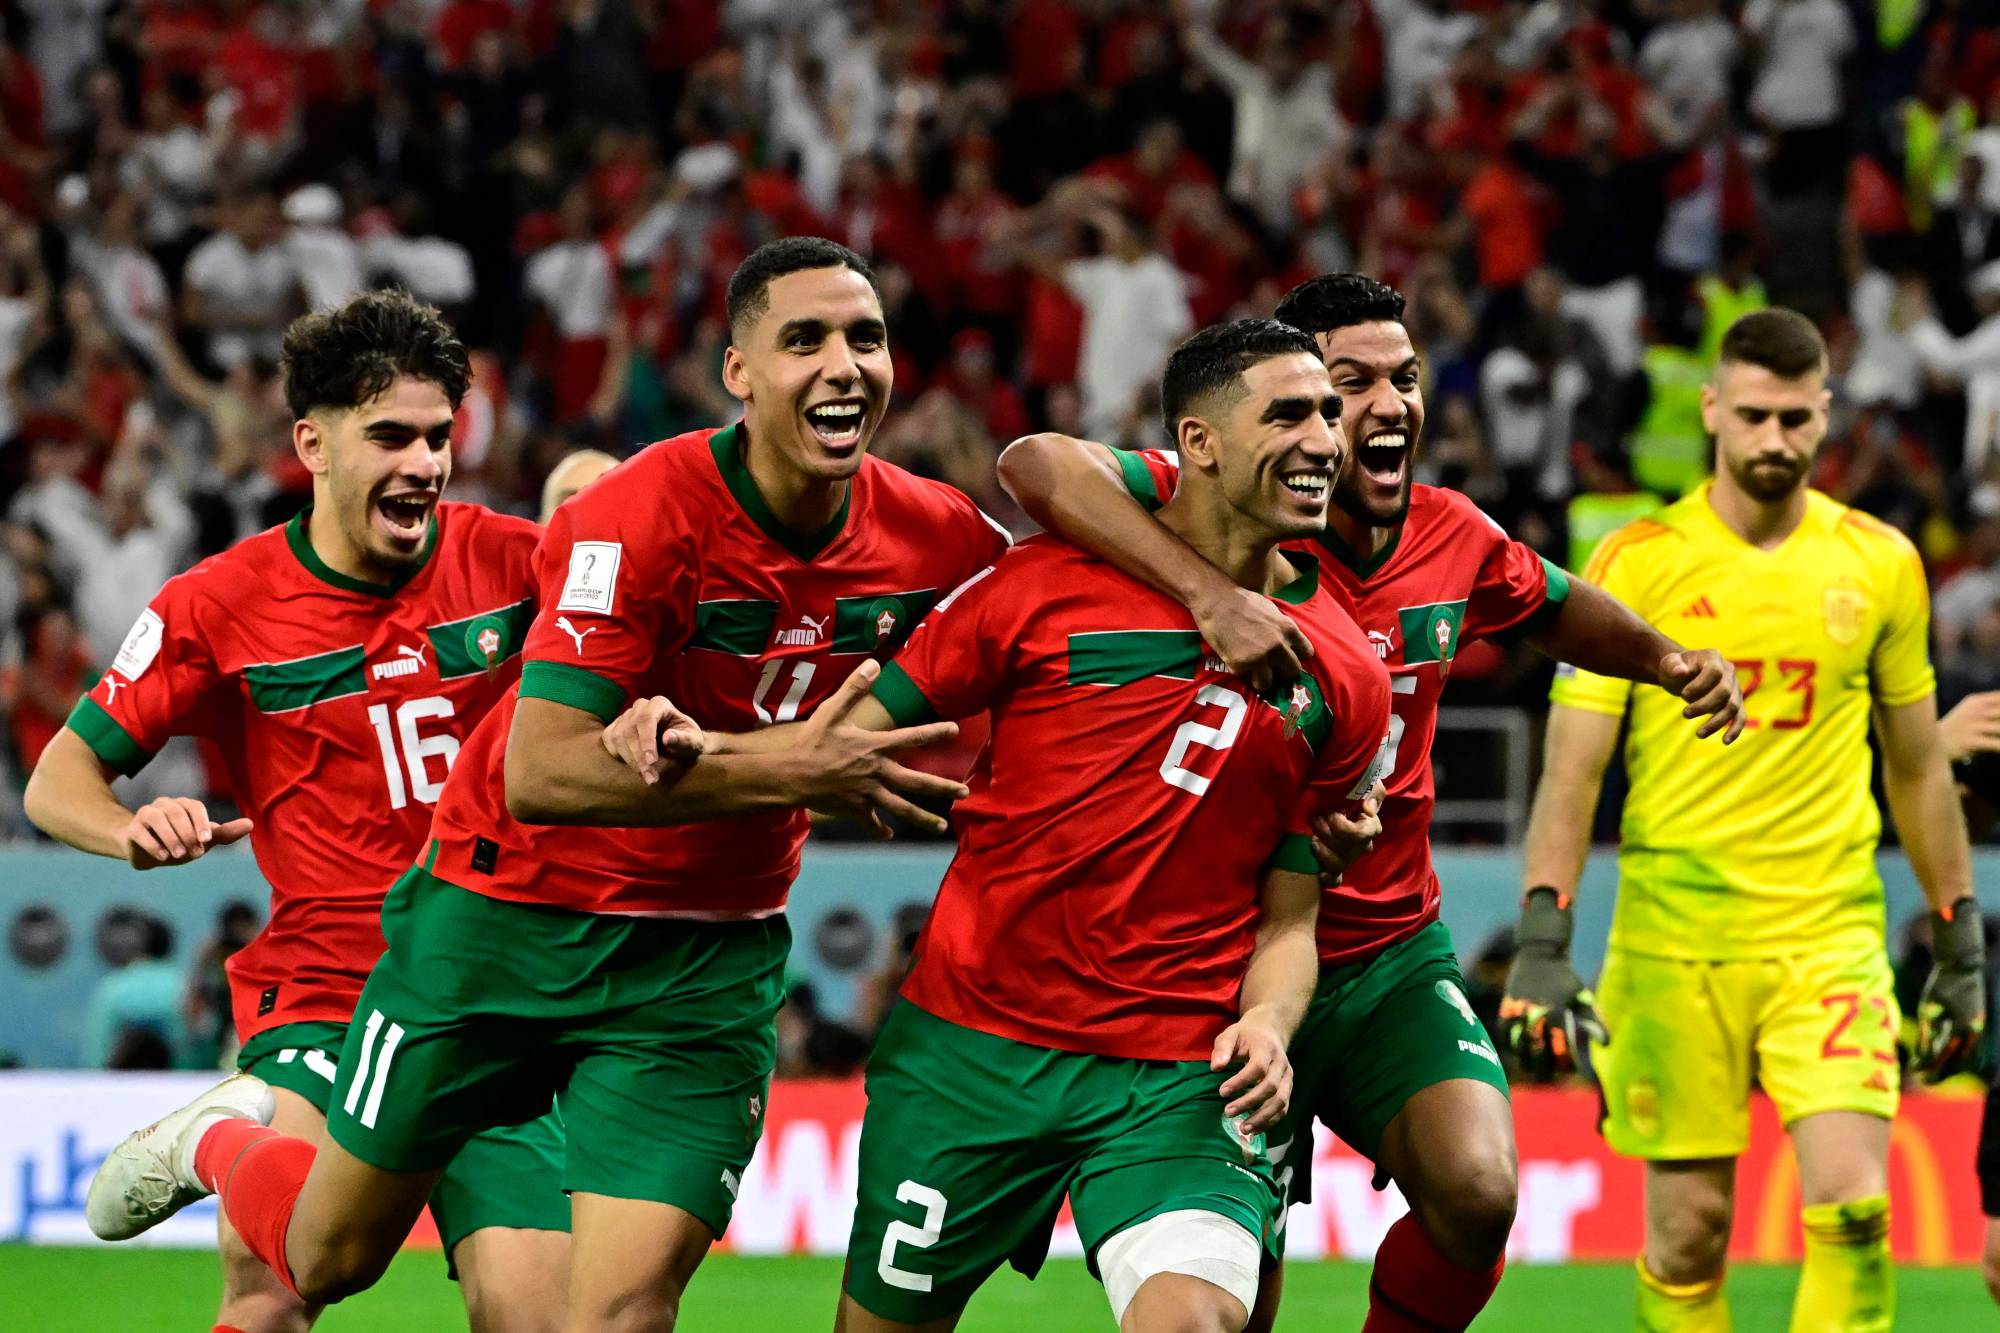 morocco in fifa world cup